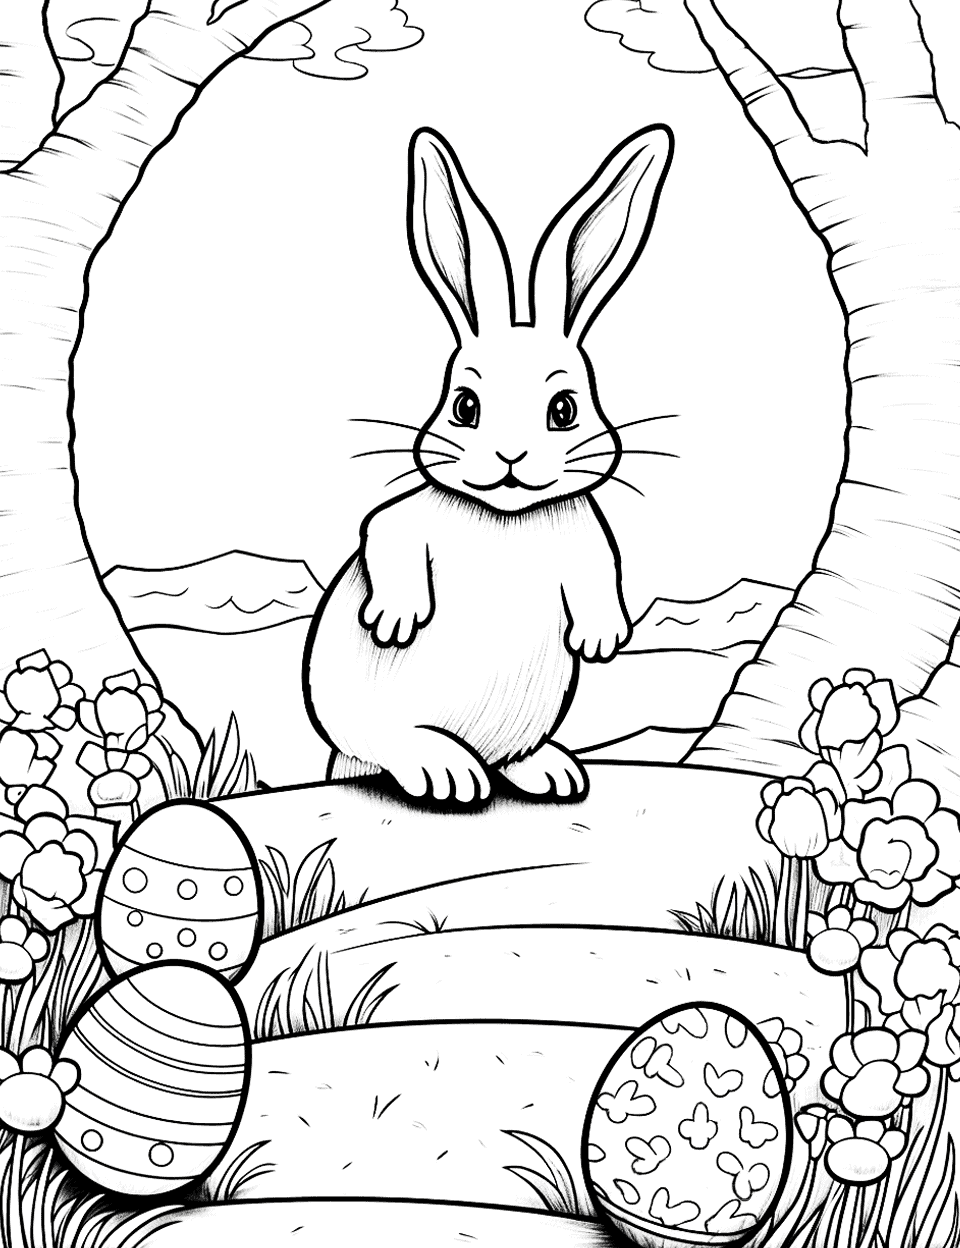 Easter Bunny Trail Coloring Page - A winding path of bunny footprints leading to a hidden treasure trove of Easter eggs, challenging kids with their coloring skills.